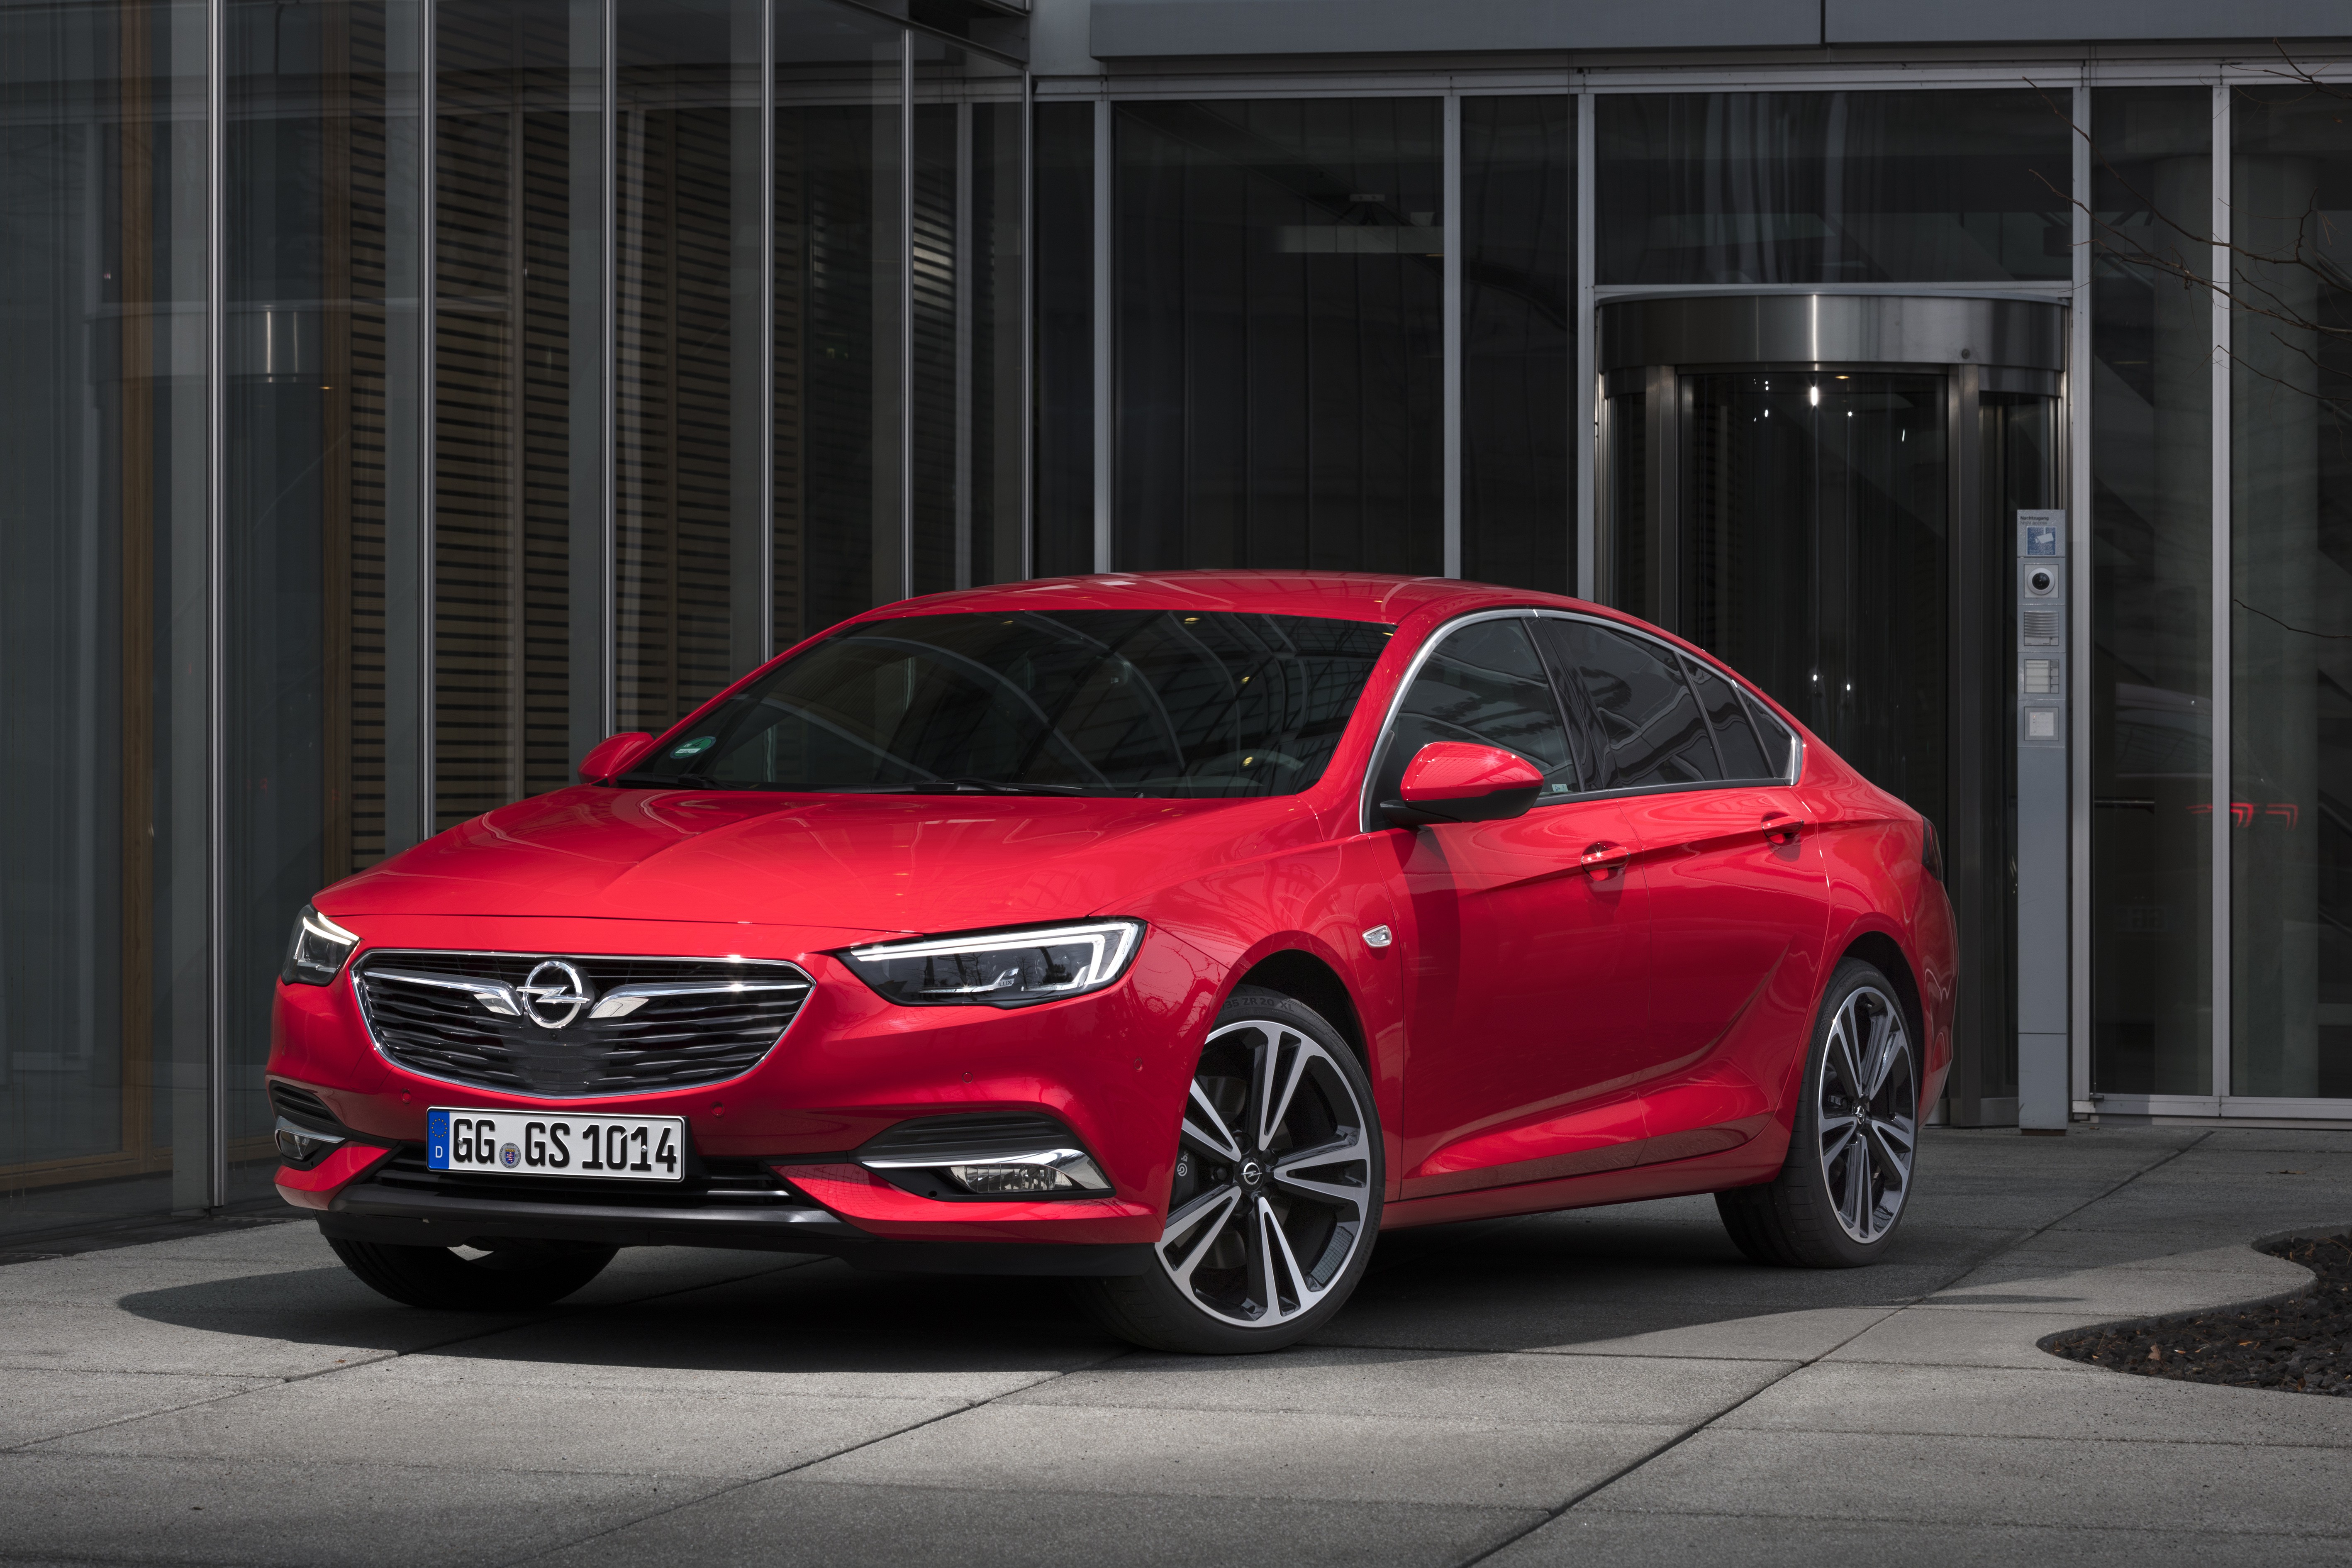 Opel Astra Hatchback modern specifications